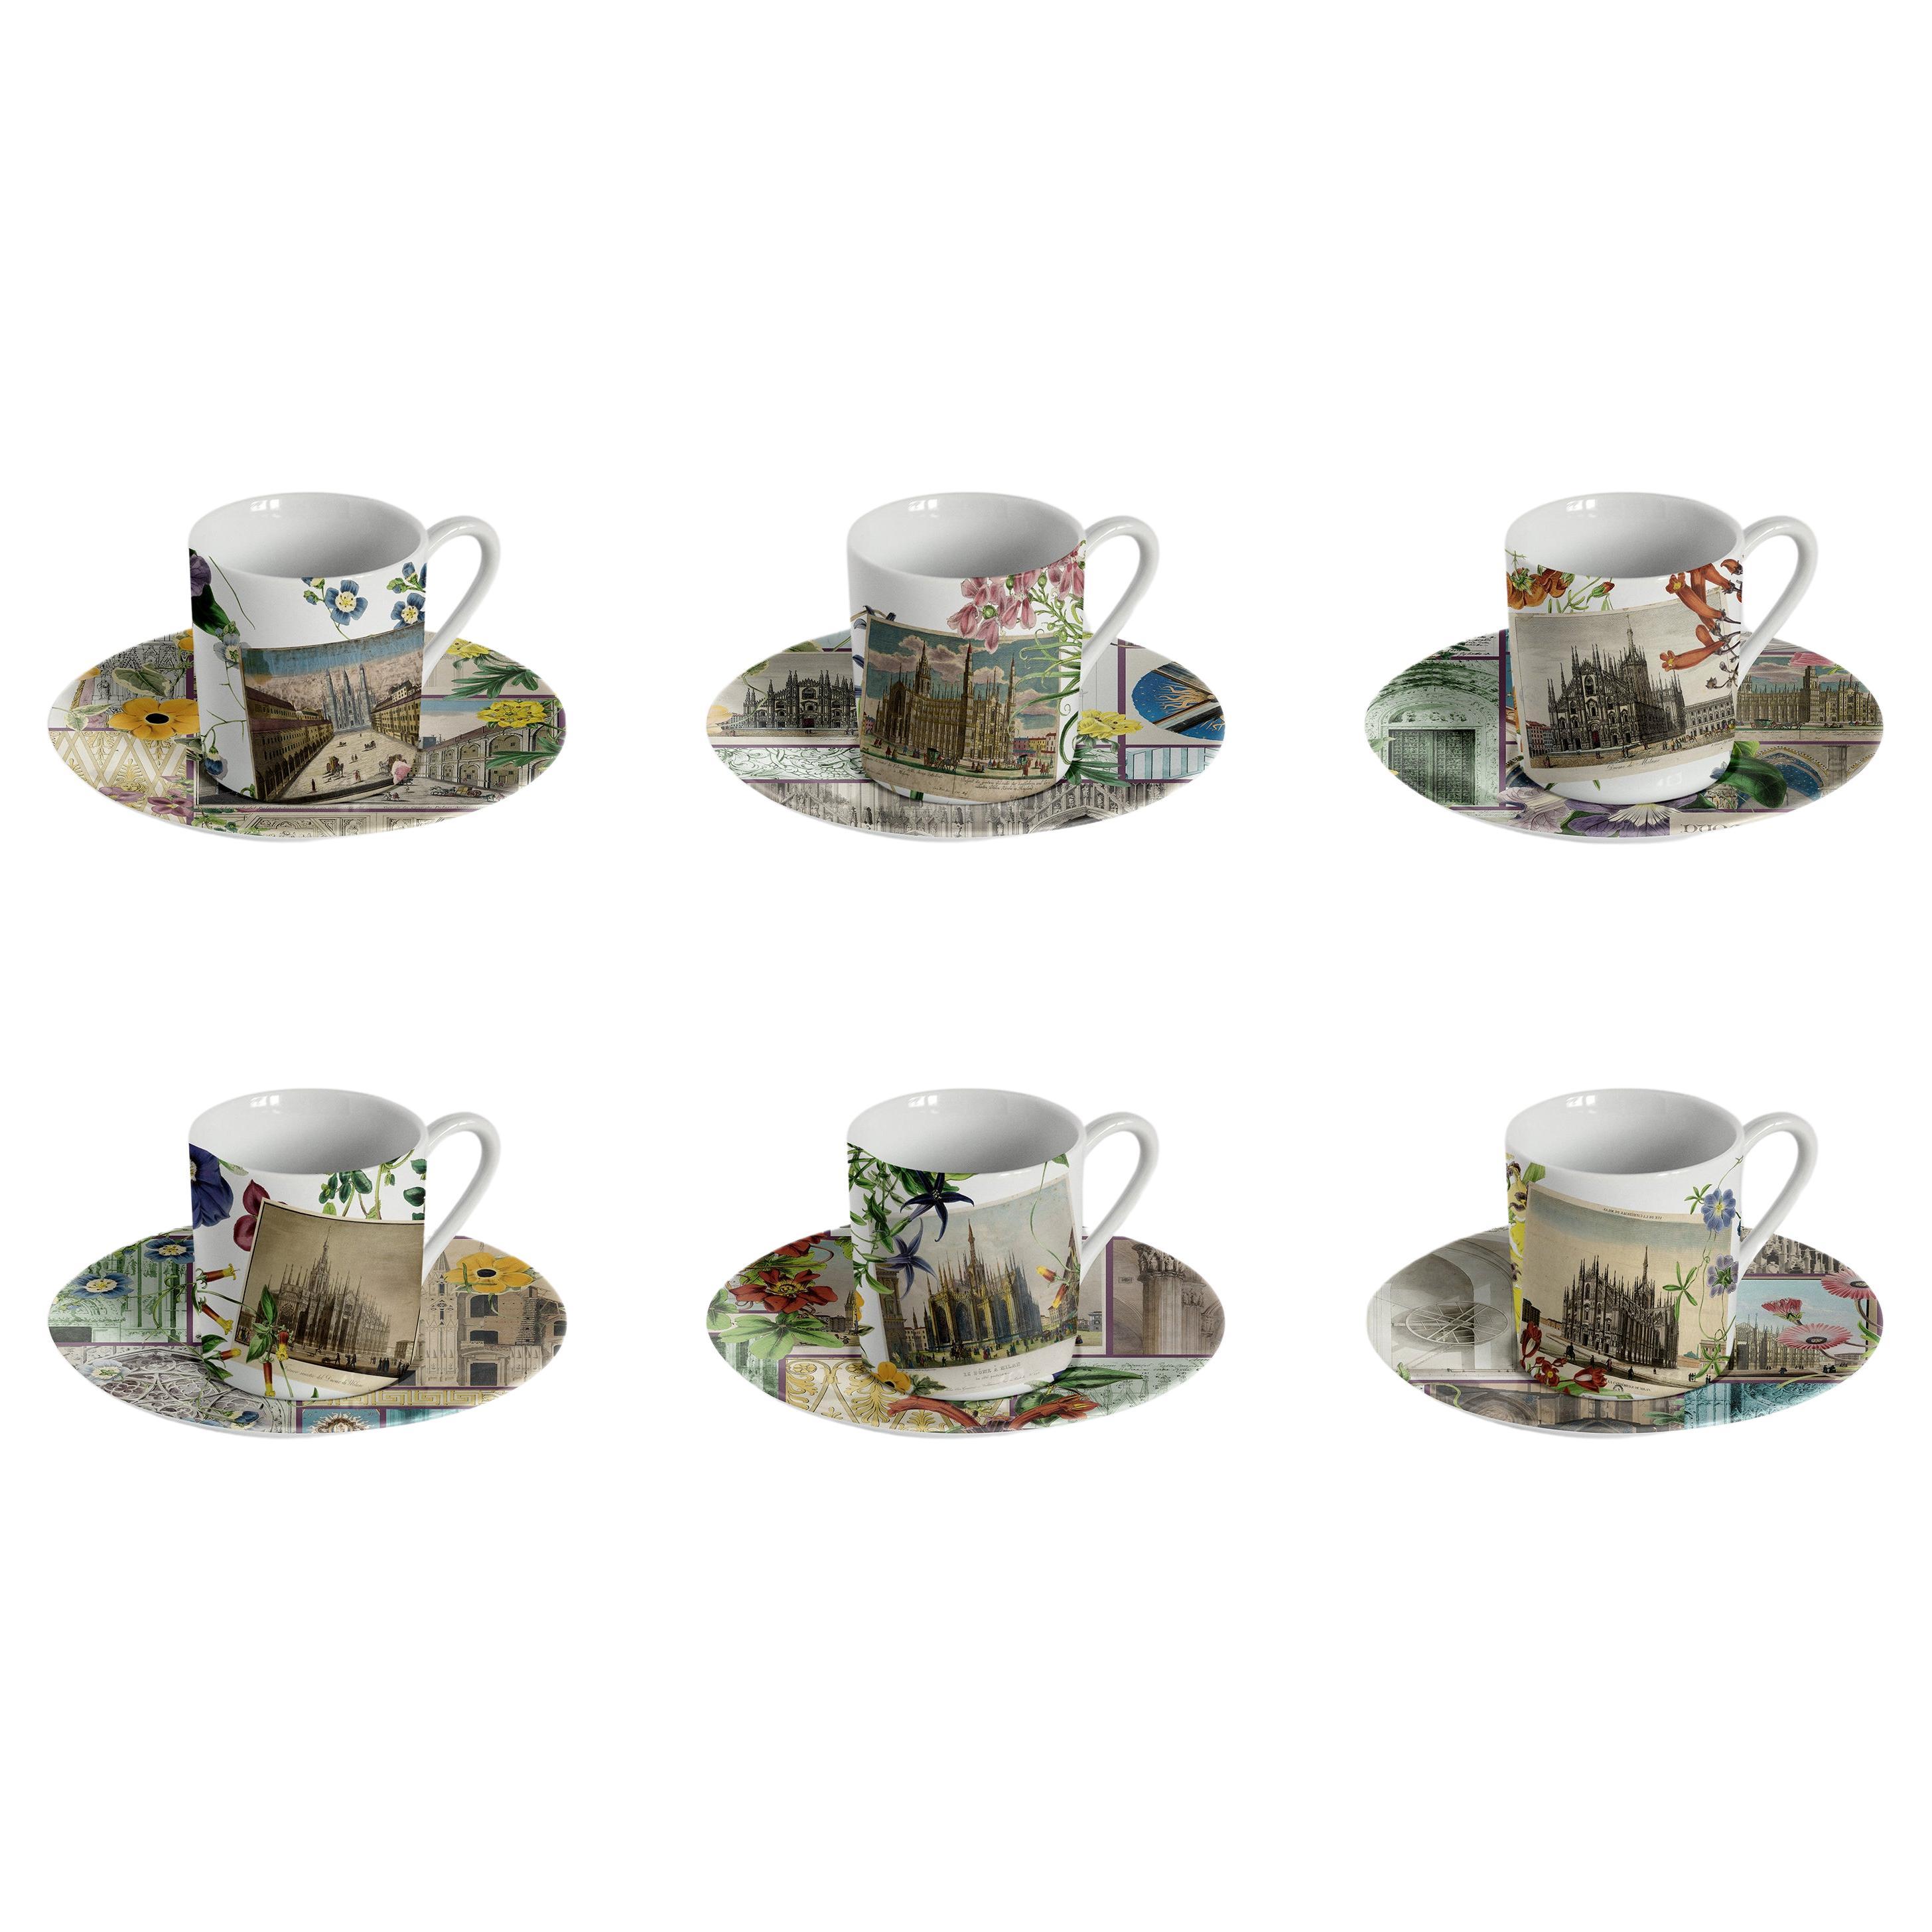 La Storia Infinita, Six Contemporary Decorated Coffee Cups with Plates For Sale